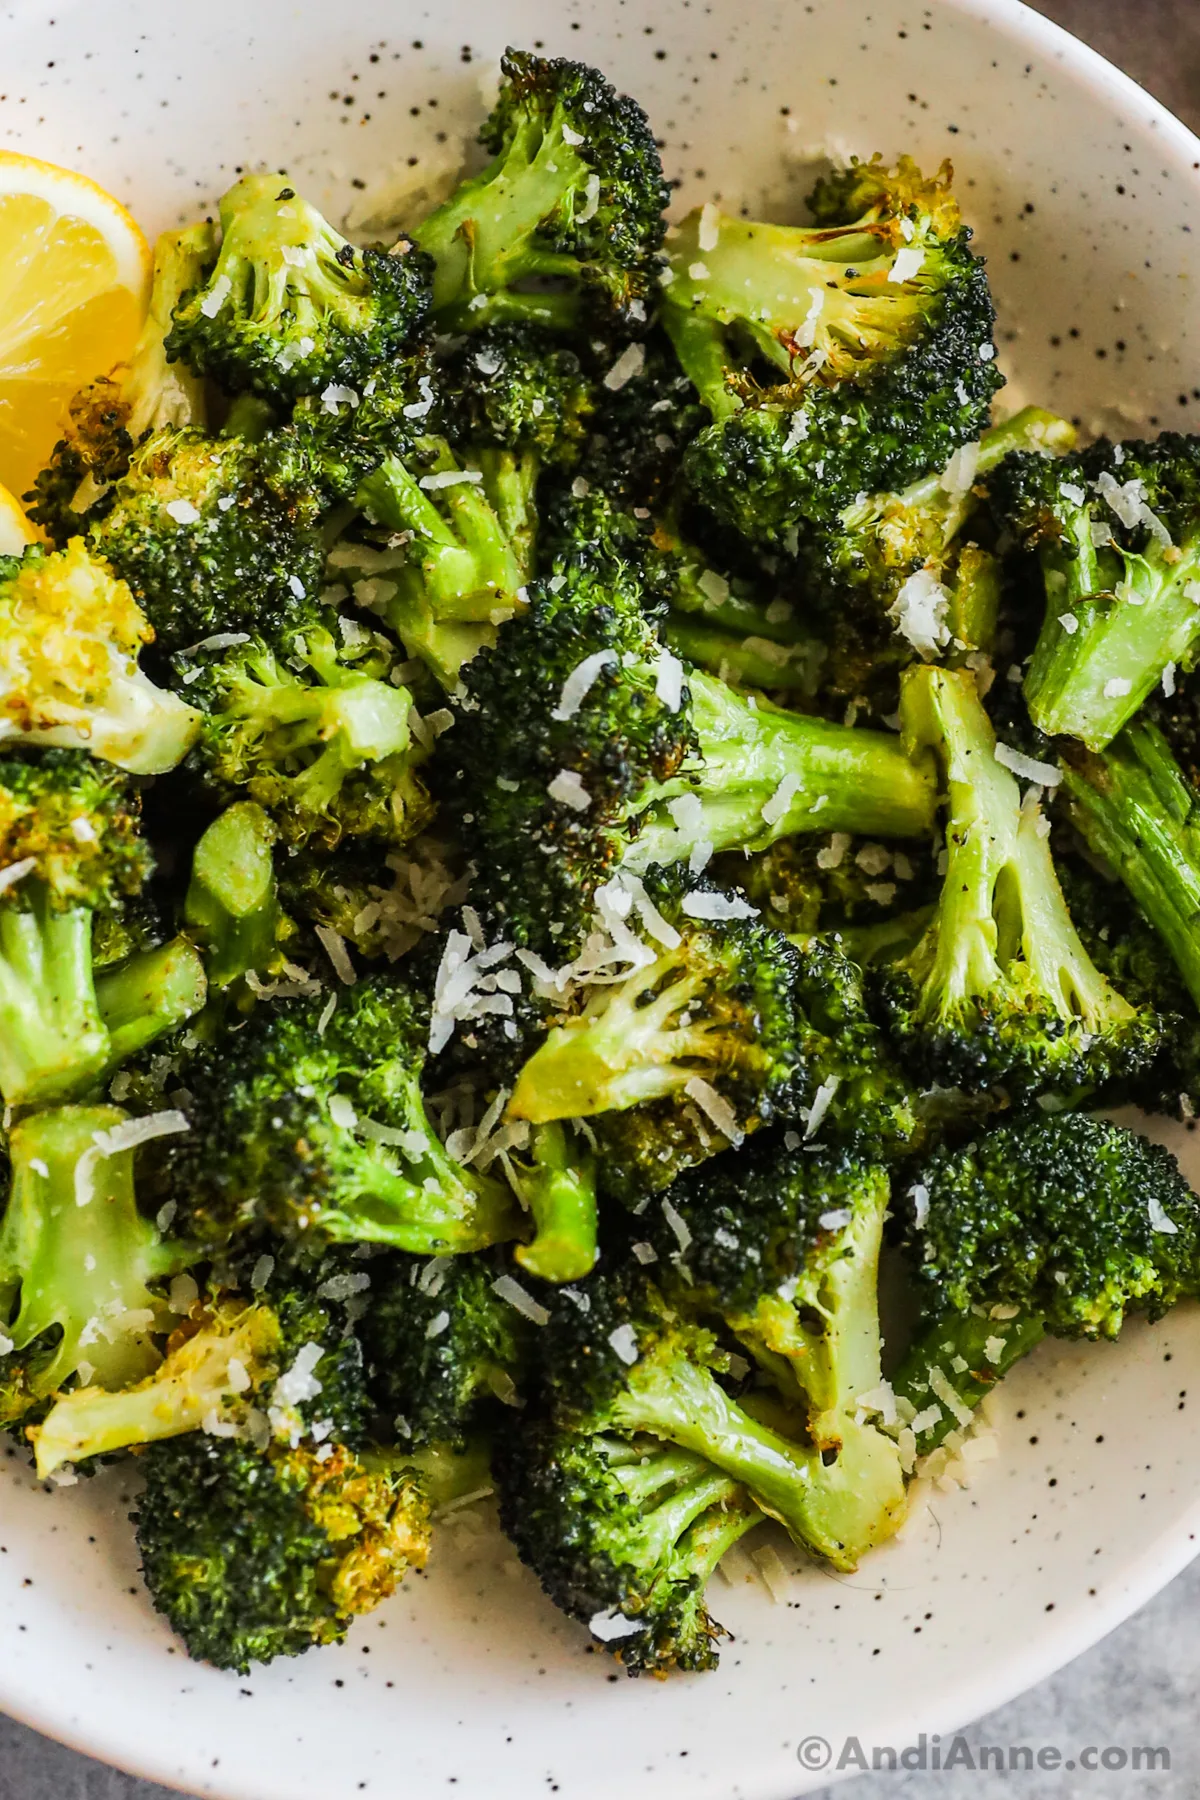 A bowl of air fryer broccoli with slices of lemon.